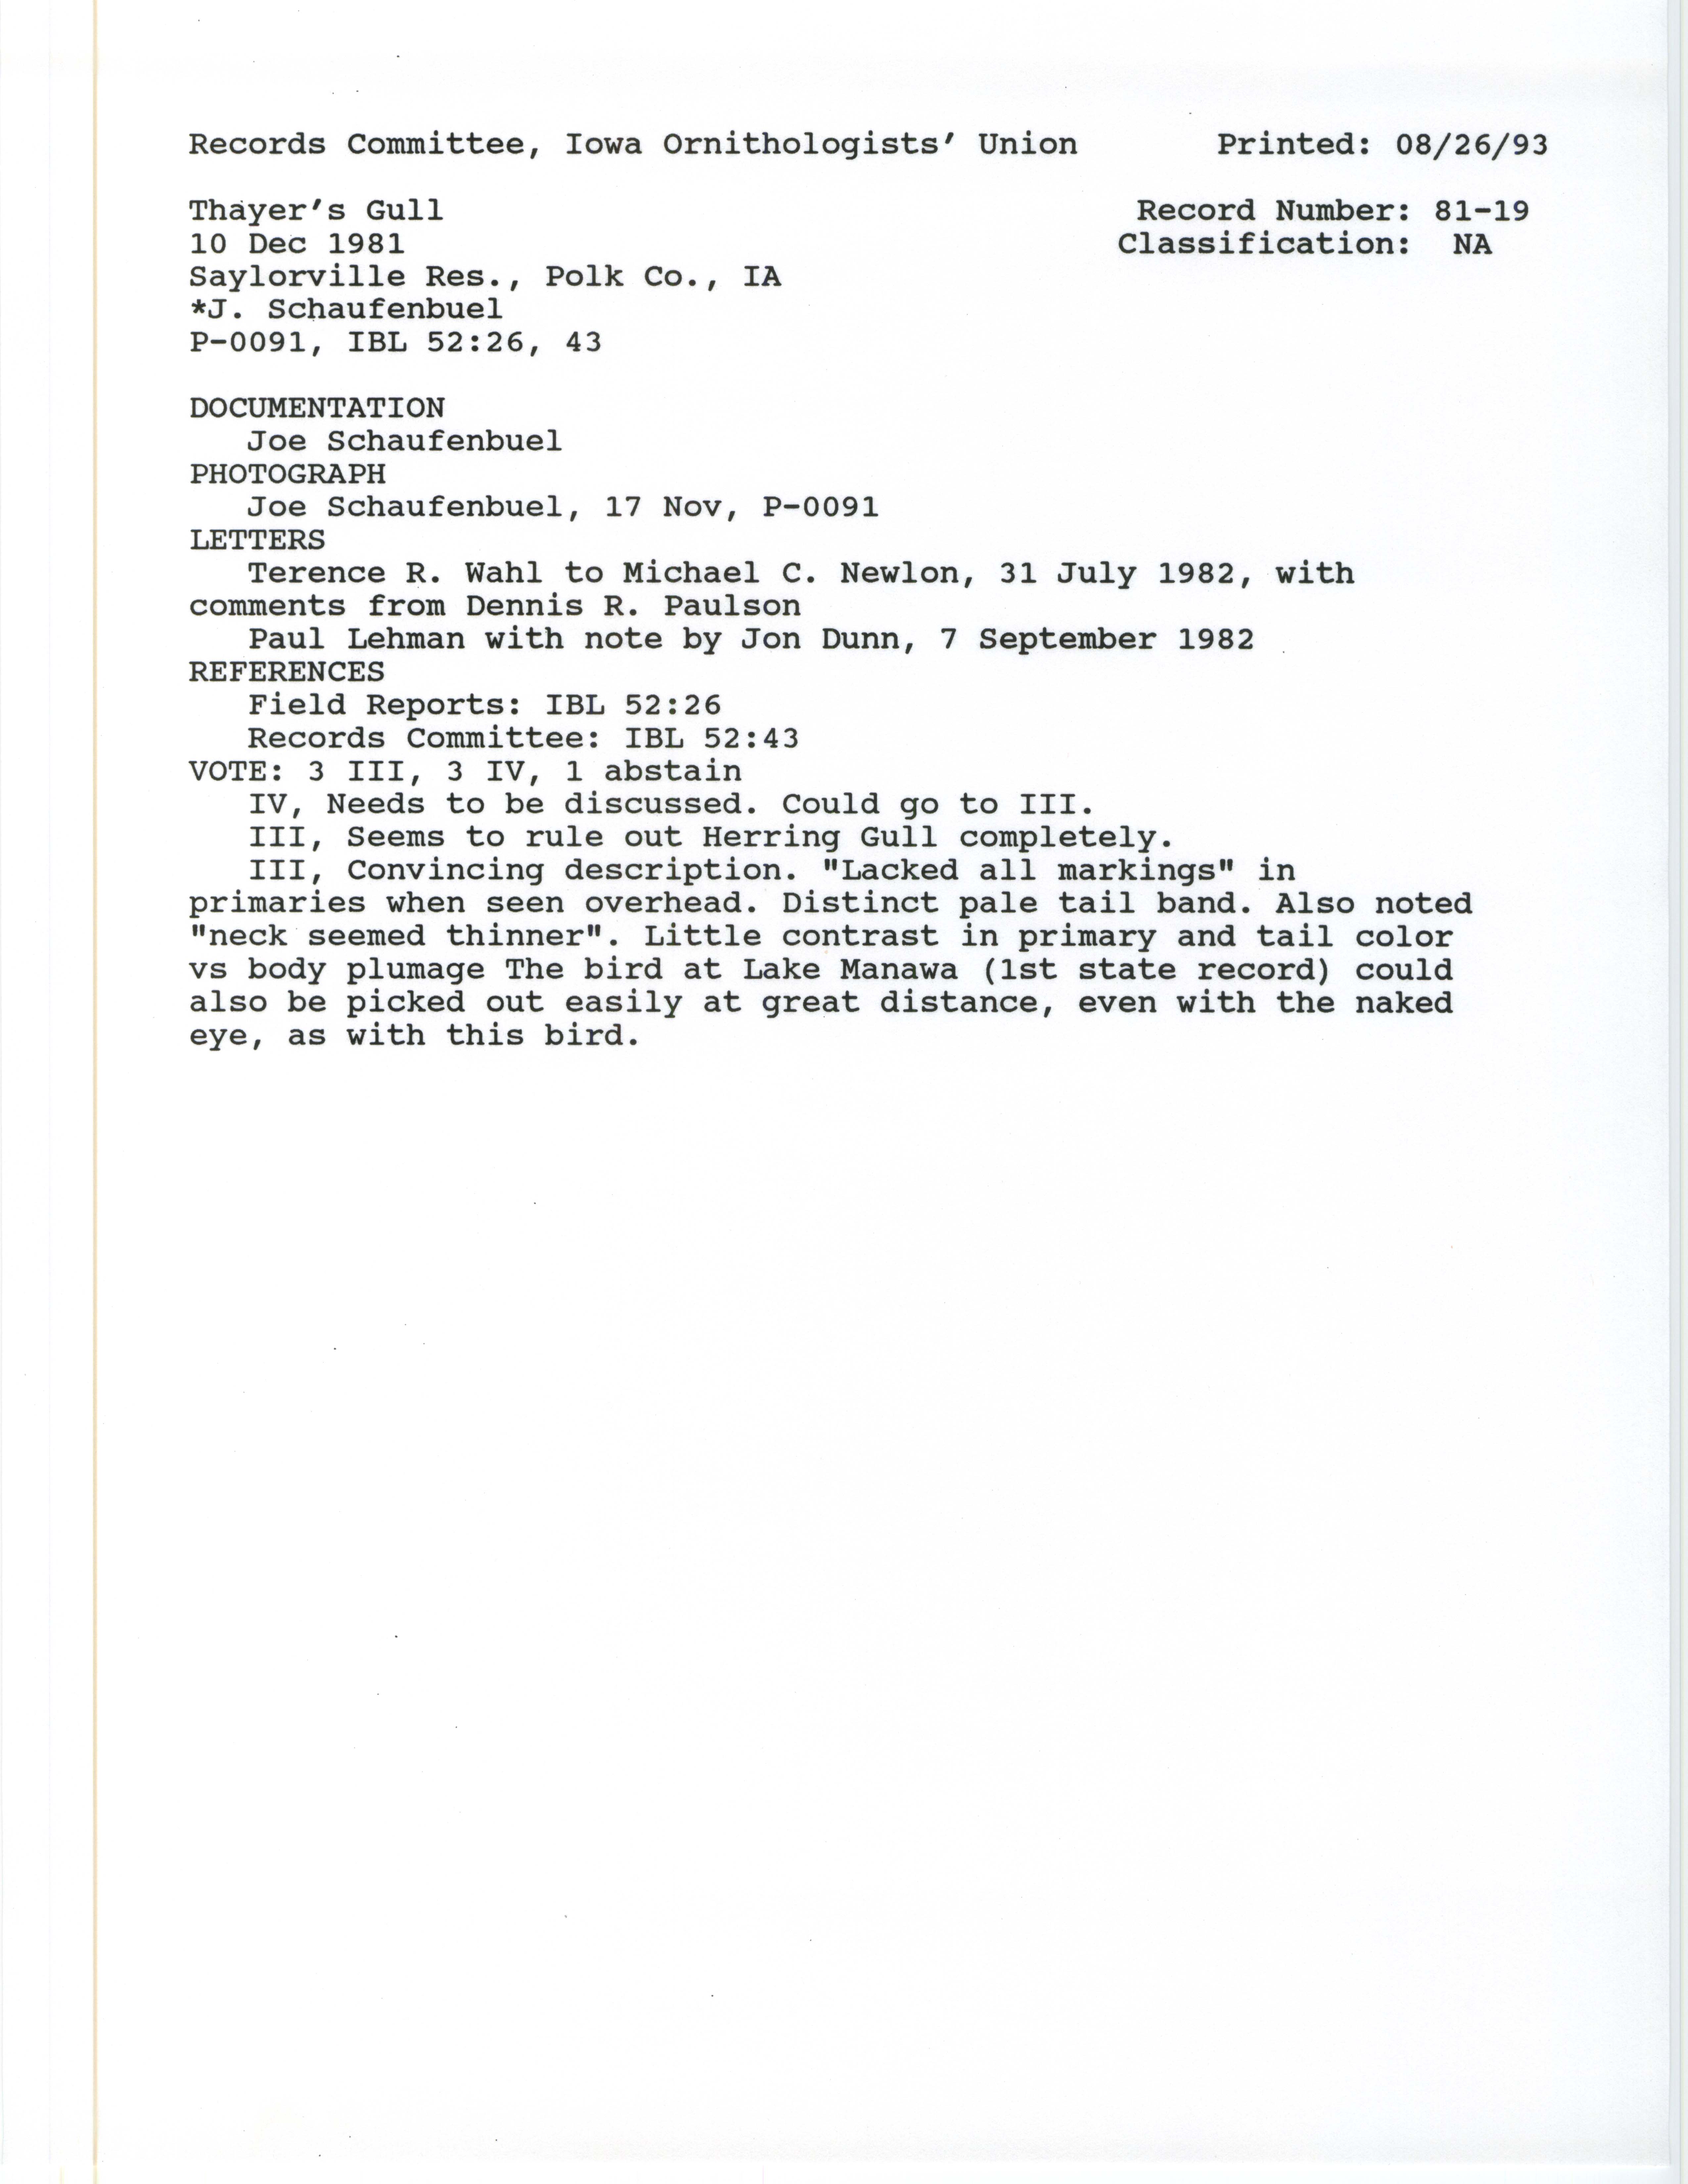 Records Committee review for rare bird sighting of Thayer's Gull at Saylorville Dam, 1981